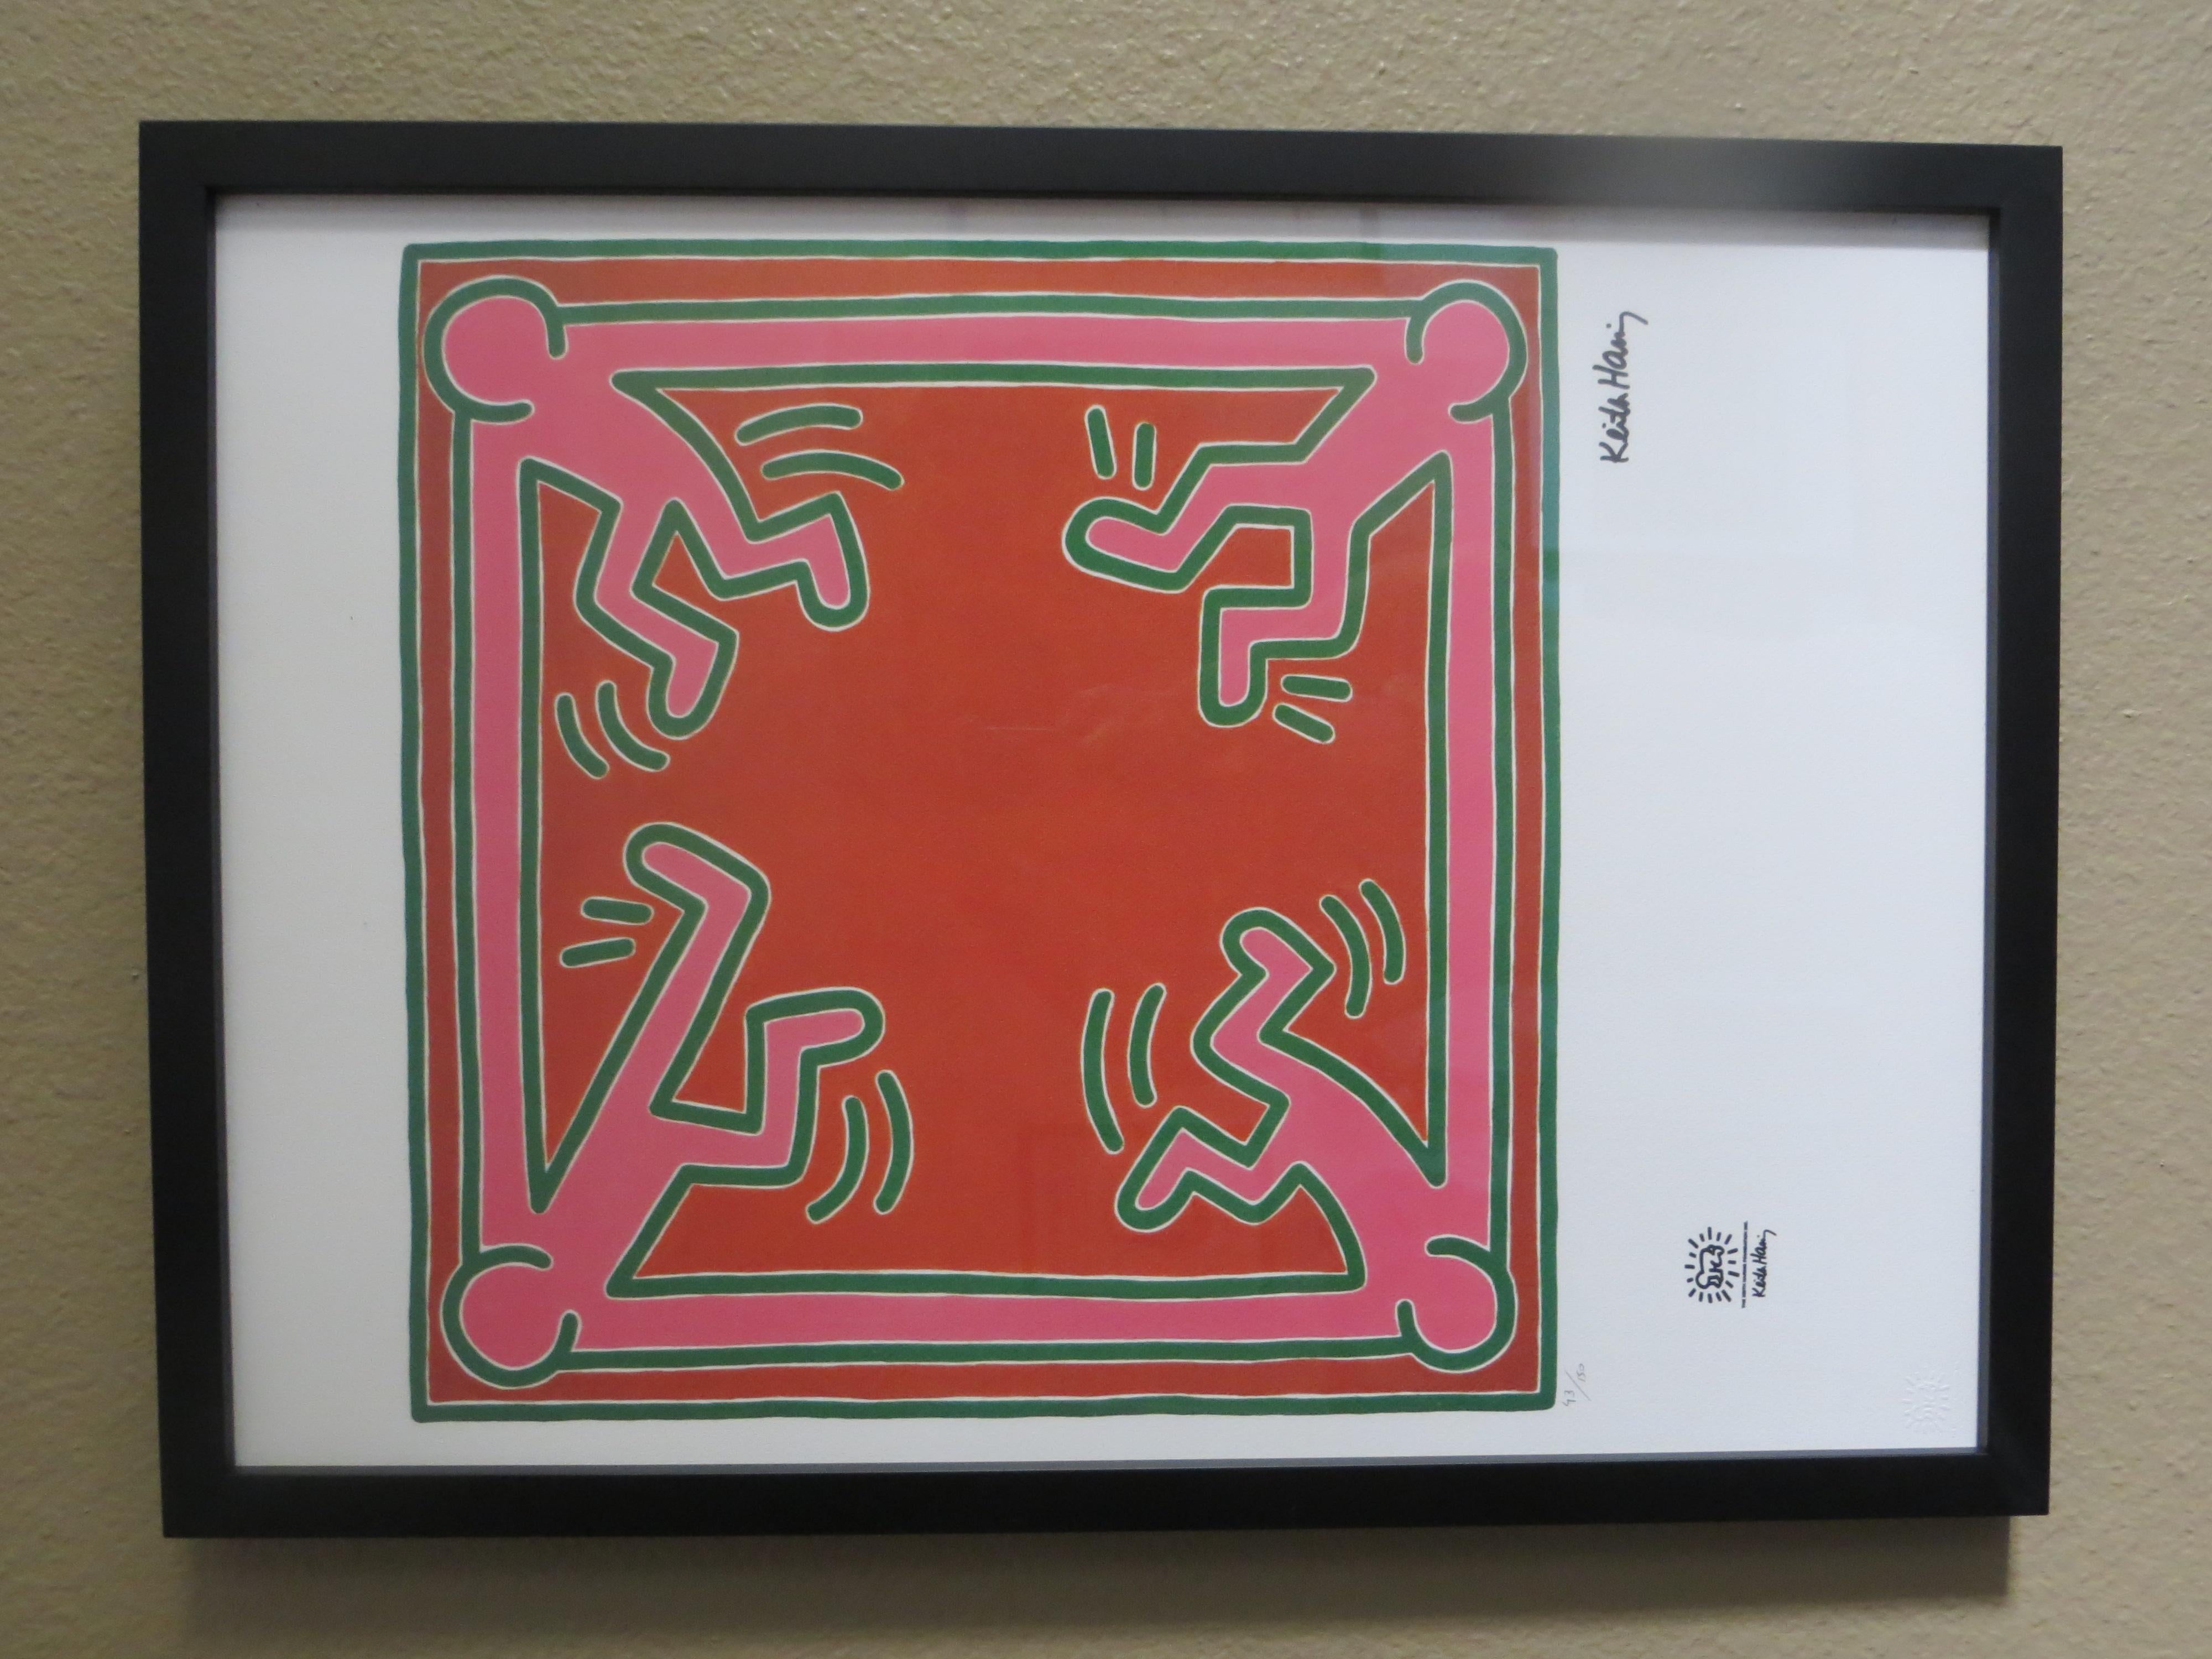   After Keith Haring,  Lithograph, Numbered  43/150 - Print by (after) Keith Haring